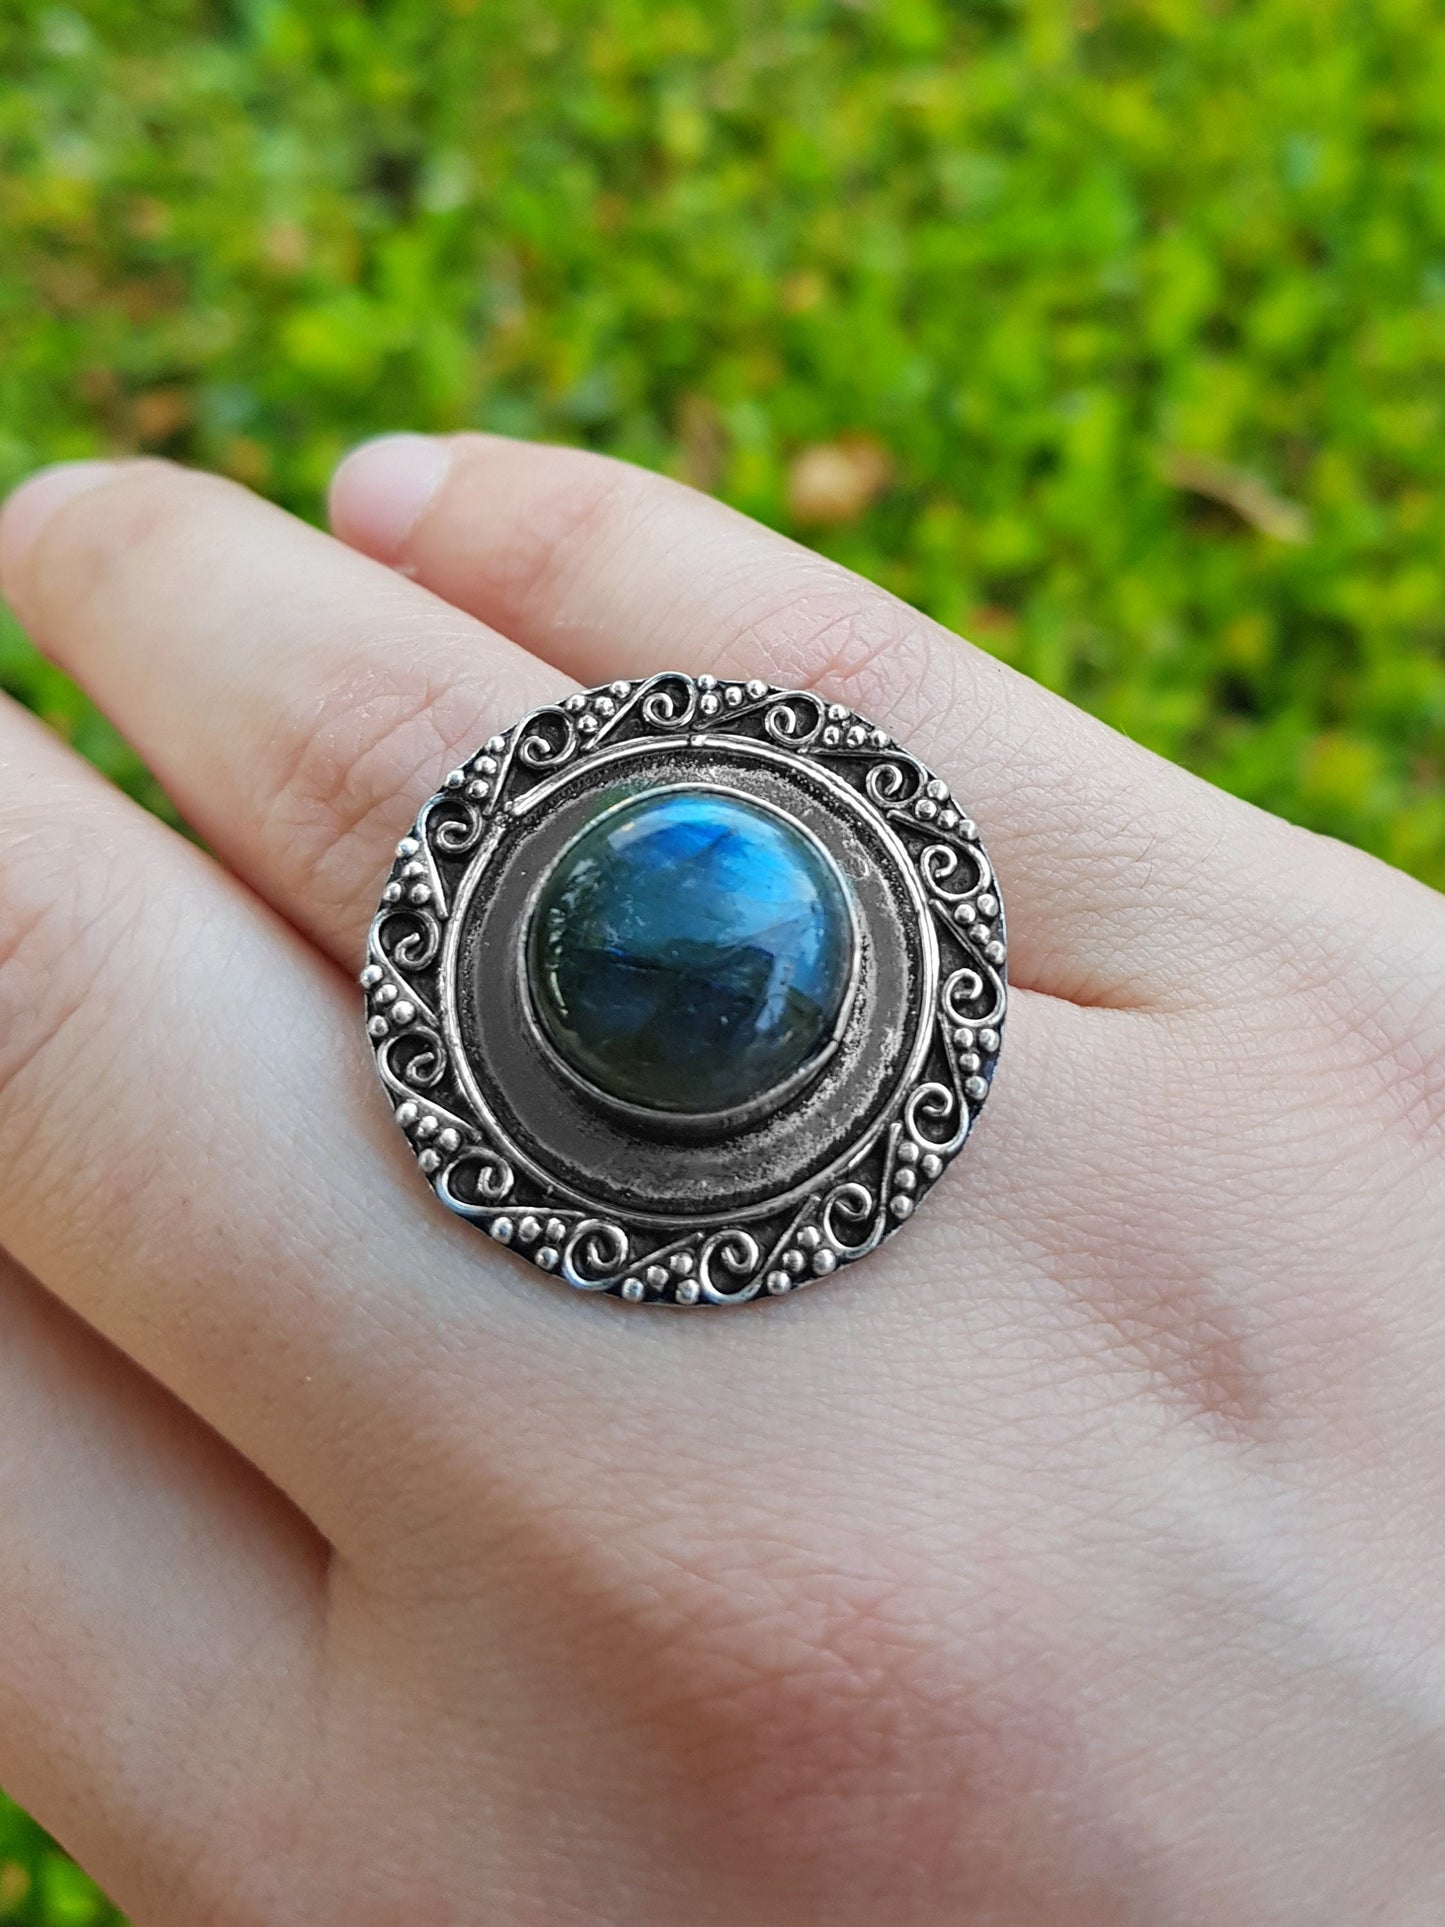 Natural Labradorite Ring Size US7 Sterling Silver Gemstone Ring Boho Rings Statement Ring Unique Gift One Of A Kind Ring